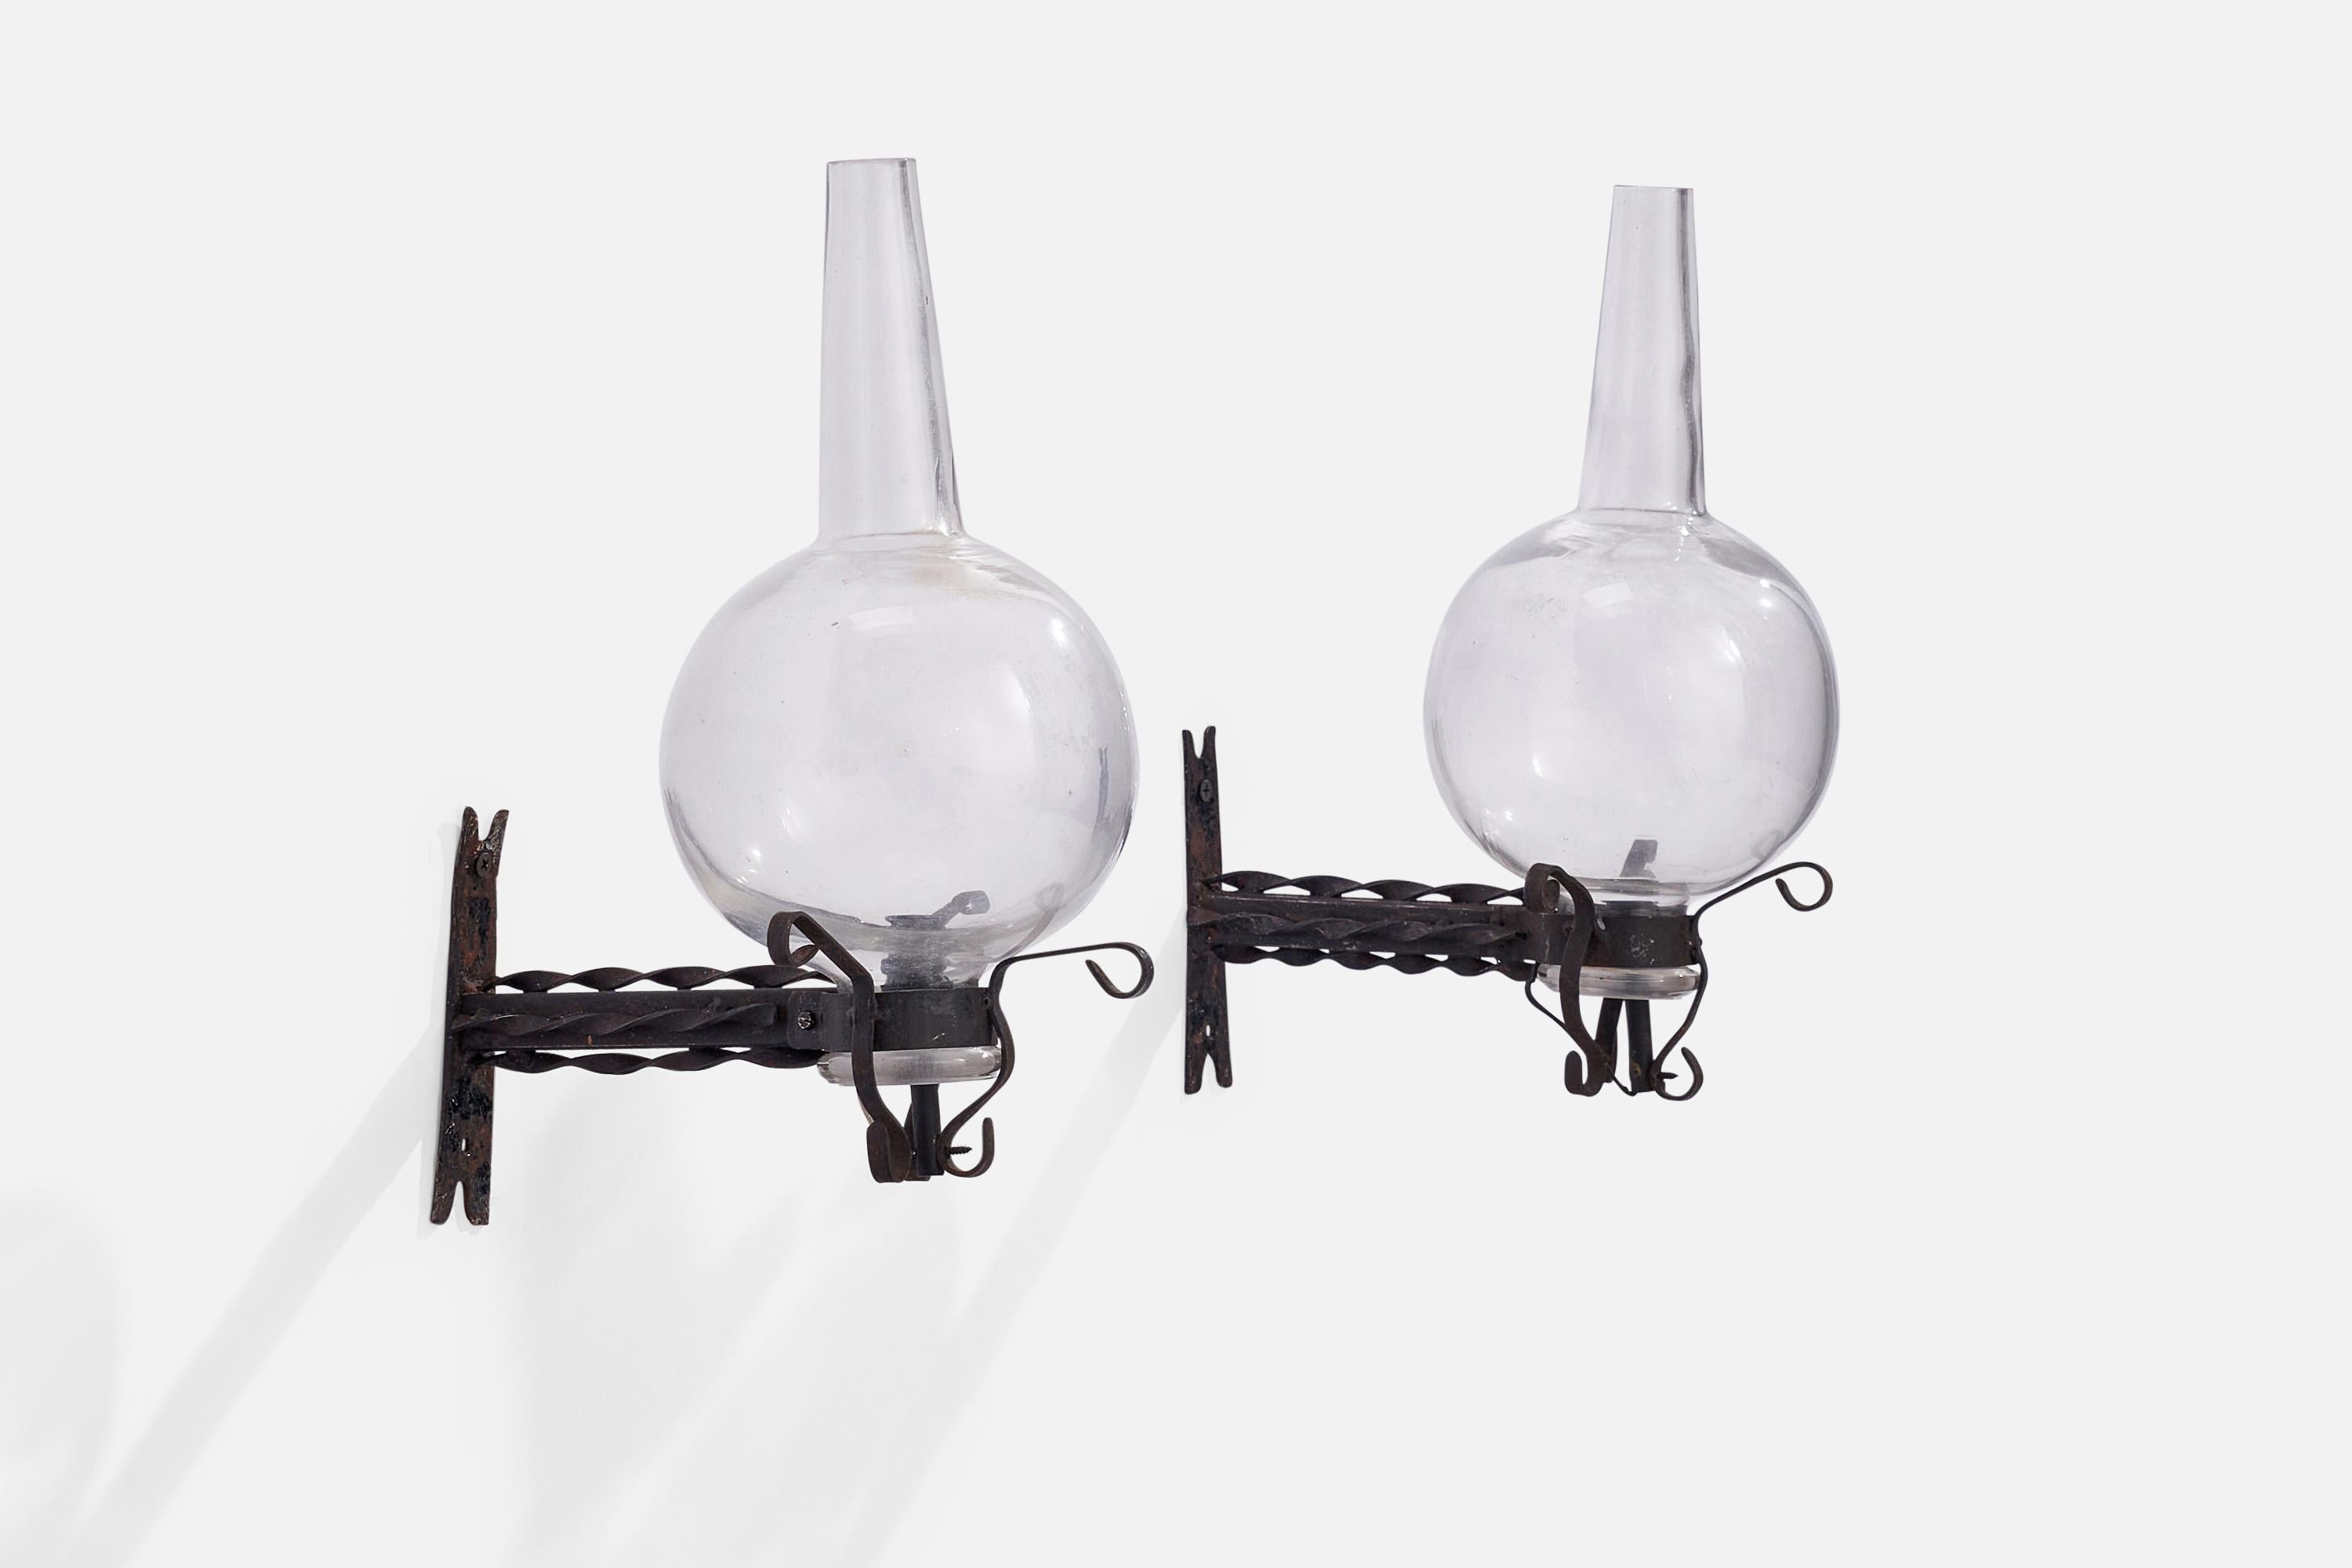 A pair of wrought iron and blown glass wall lights designed and produced in Italy, 1930s.

Overall Dimensions (inches): 14.5” H x 6” W x 10” D
Back Plate Dimensions (inches): 5.5”  H x 1.25” W x .25” D
Bulb Specifications: E-14 Bulb
Number of